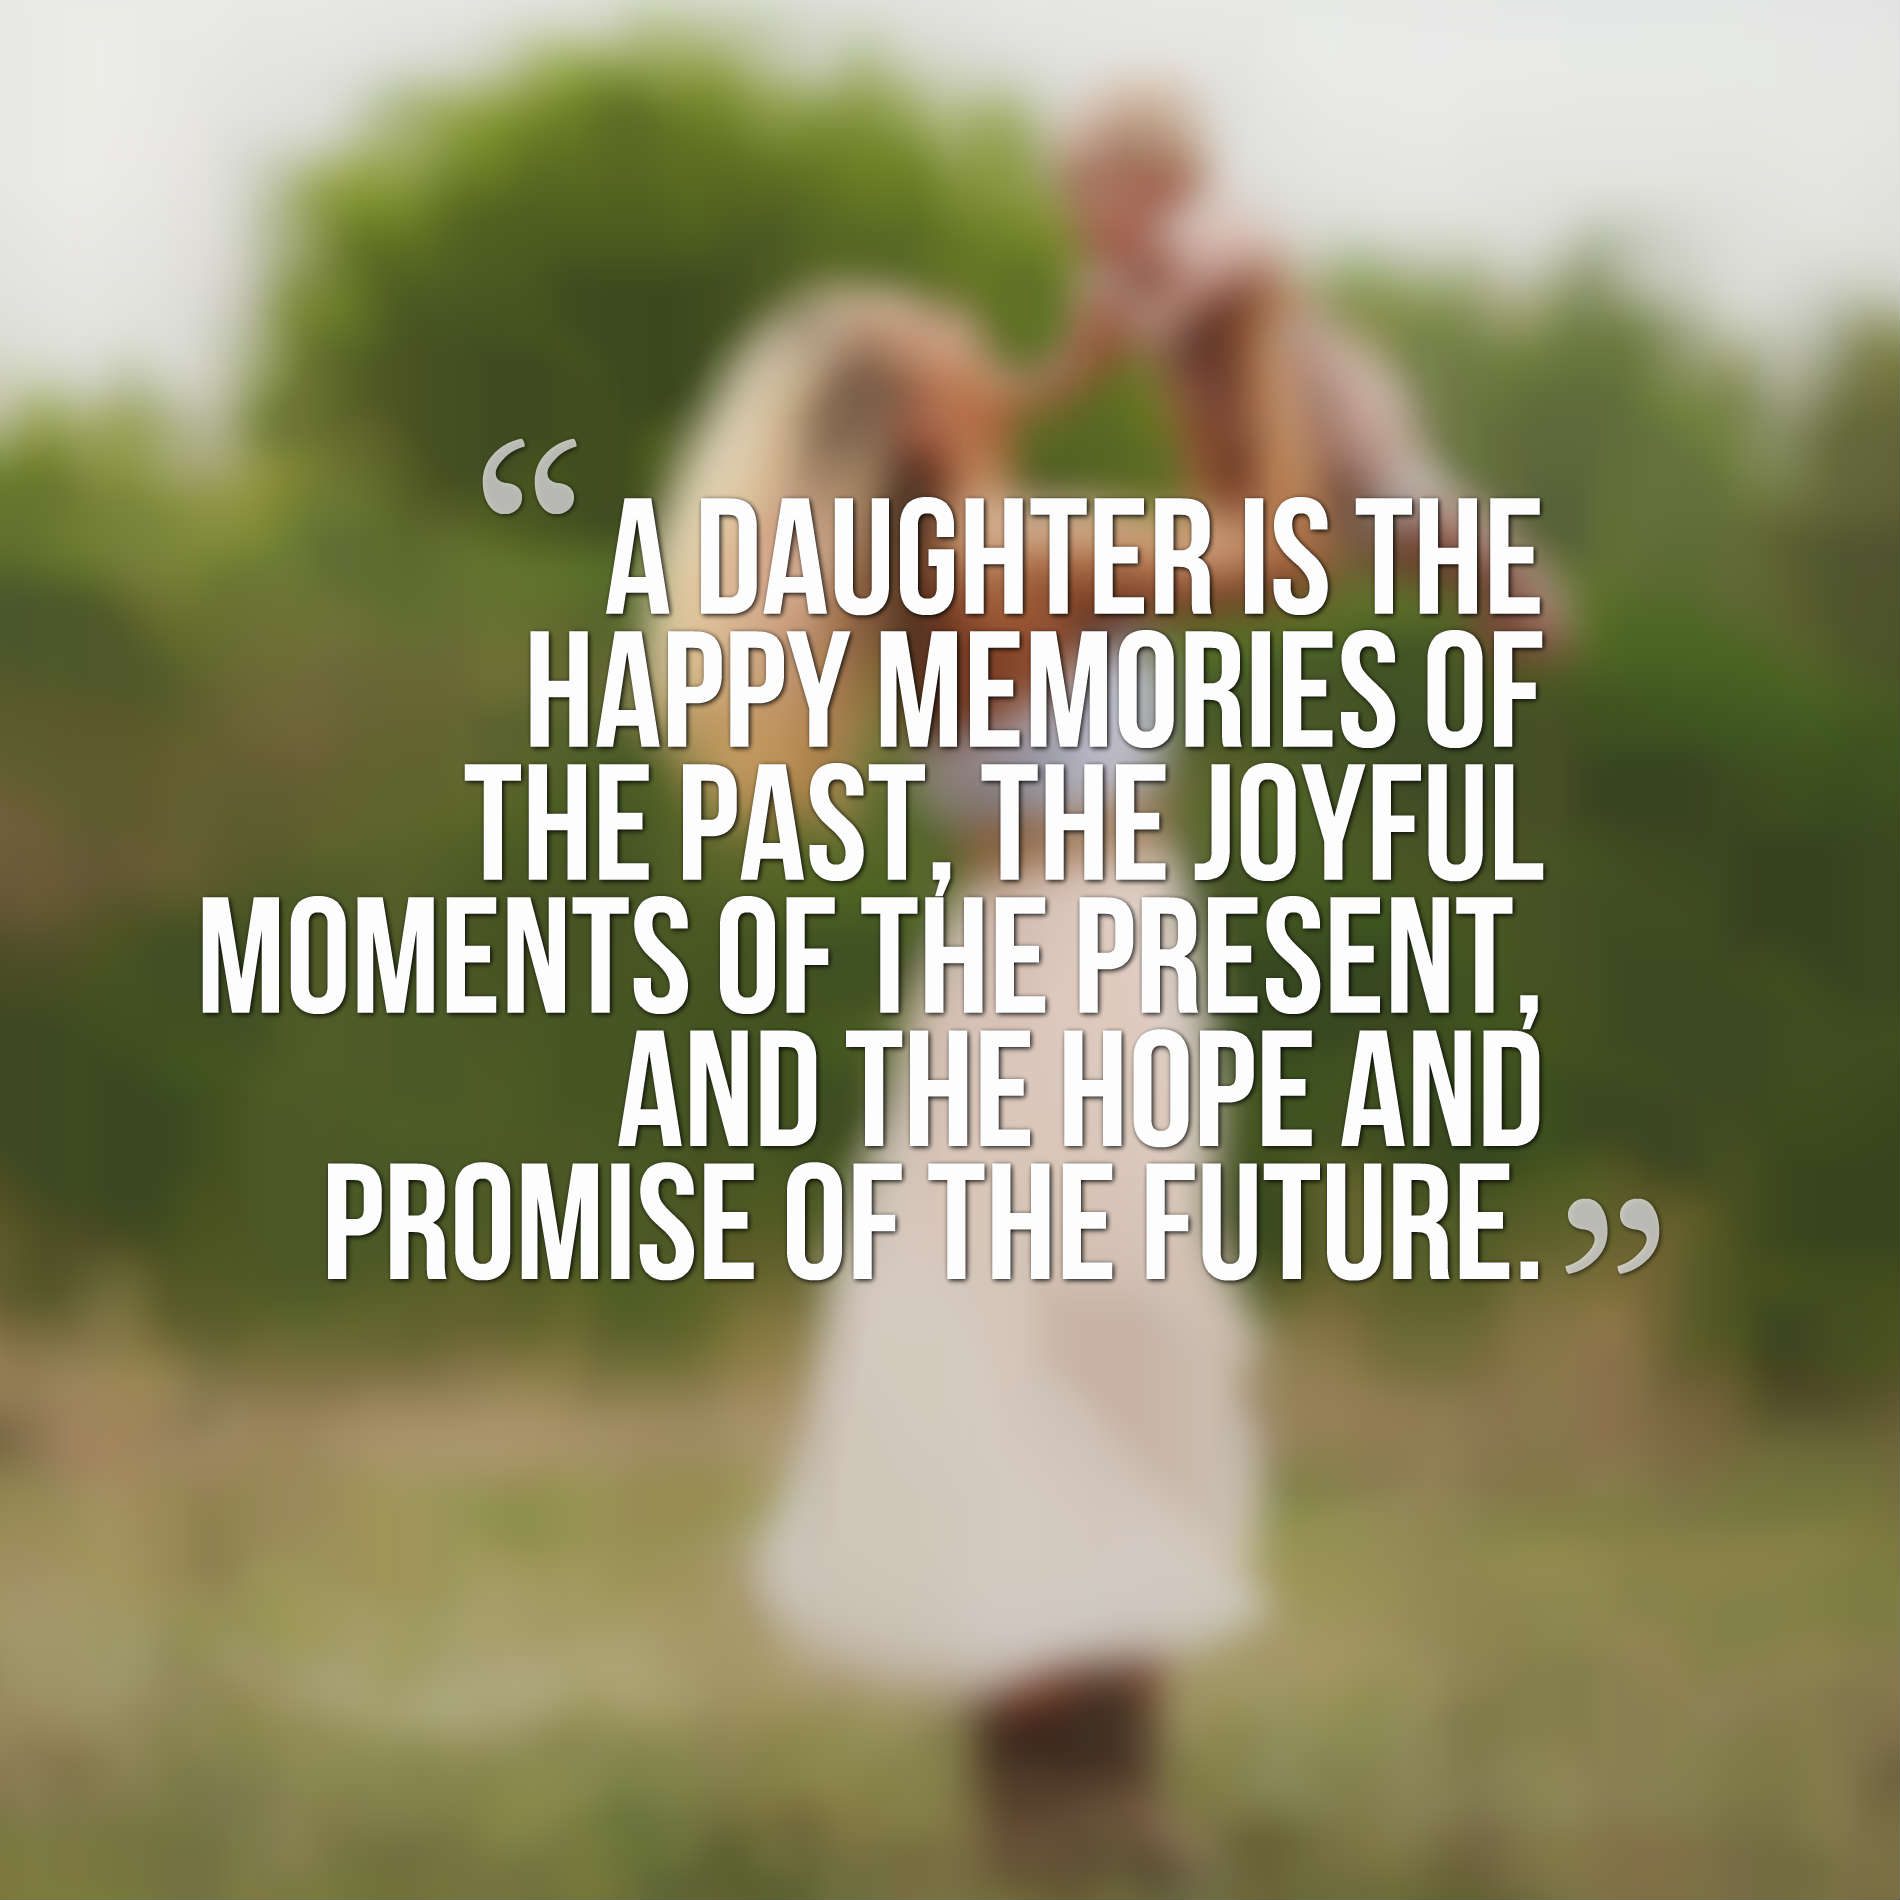 A daughter is the happy memories of the past, the joyful moments of the present, and the hope and promise of the future.